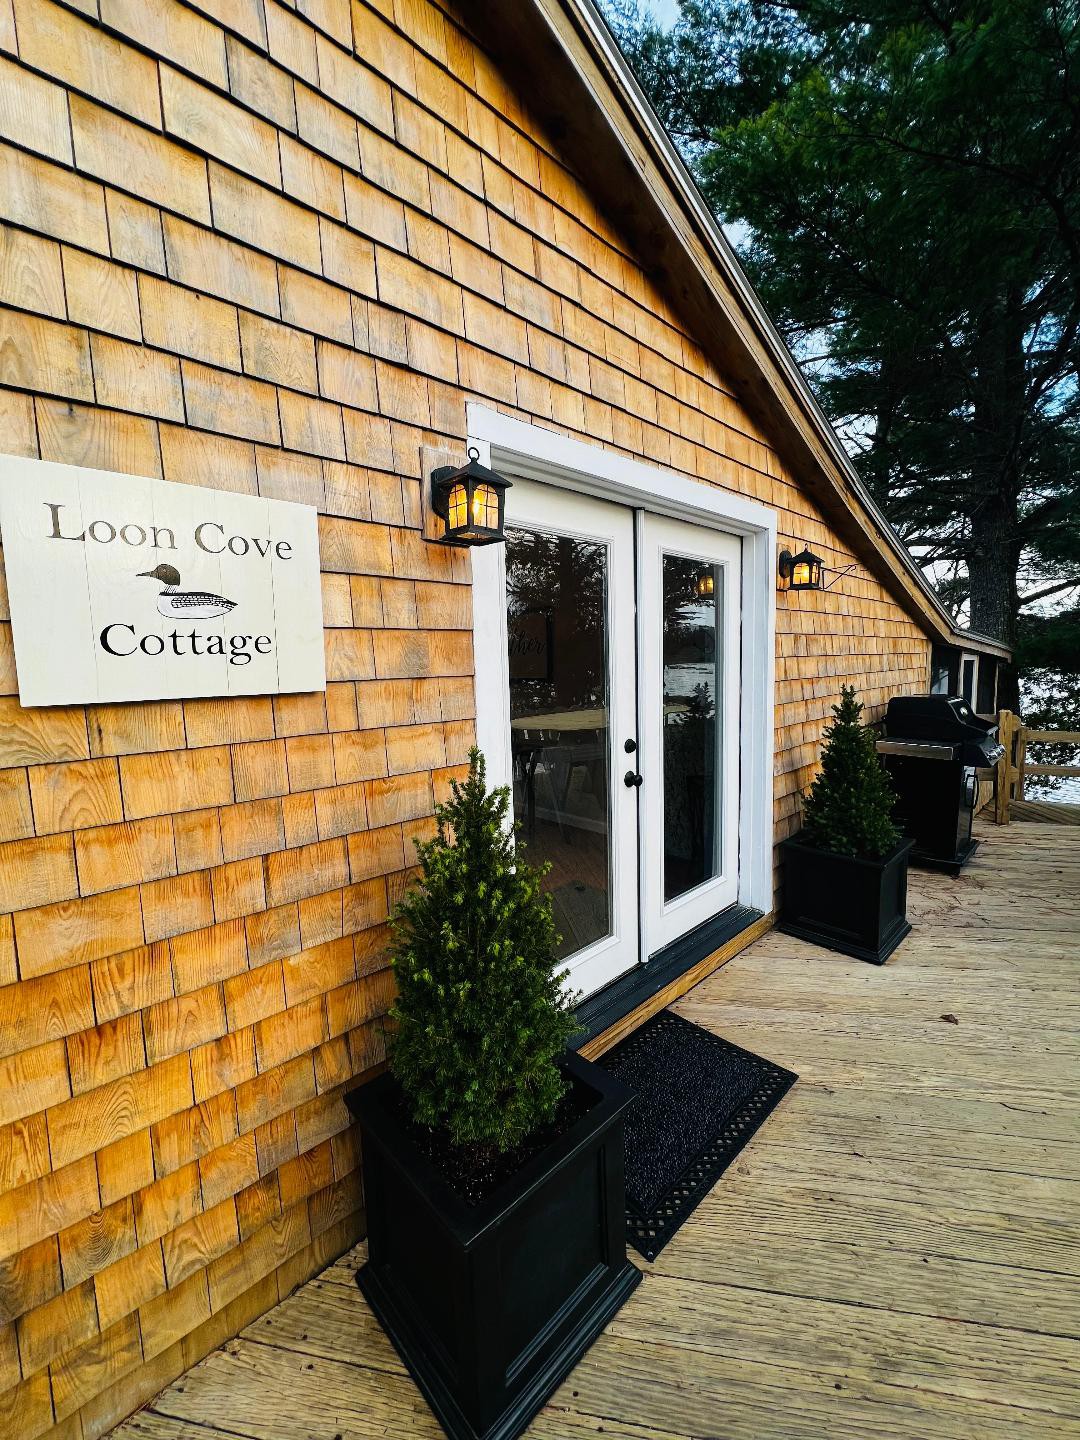 Loon Cove Cottage